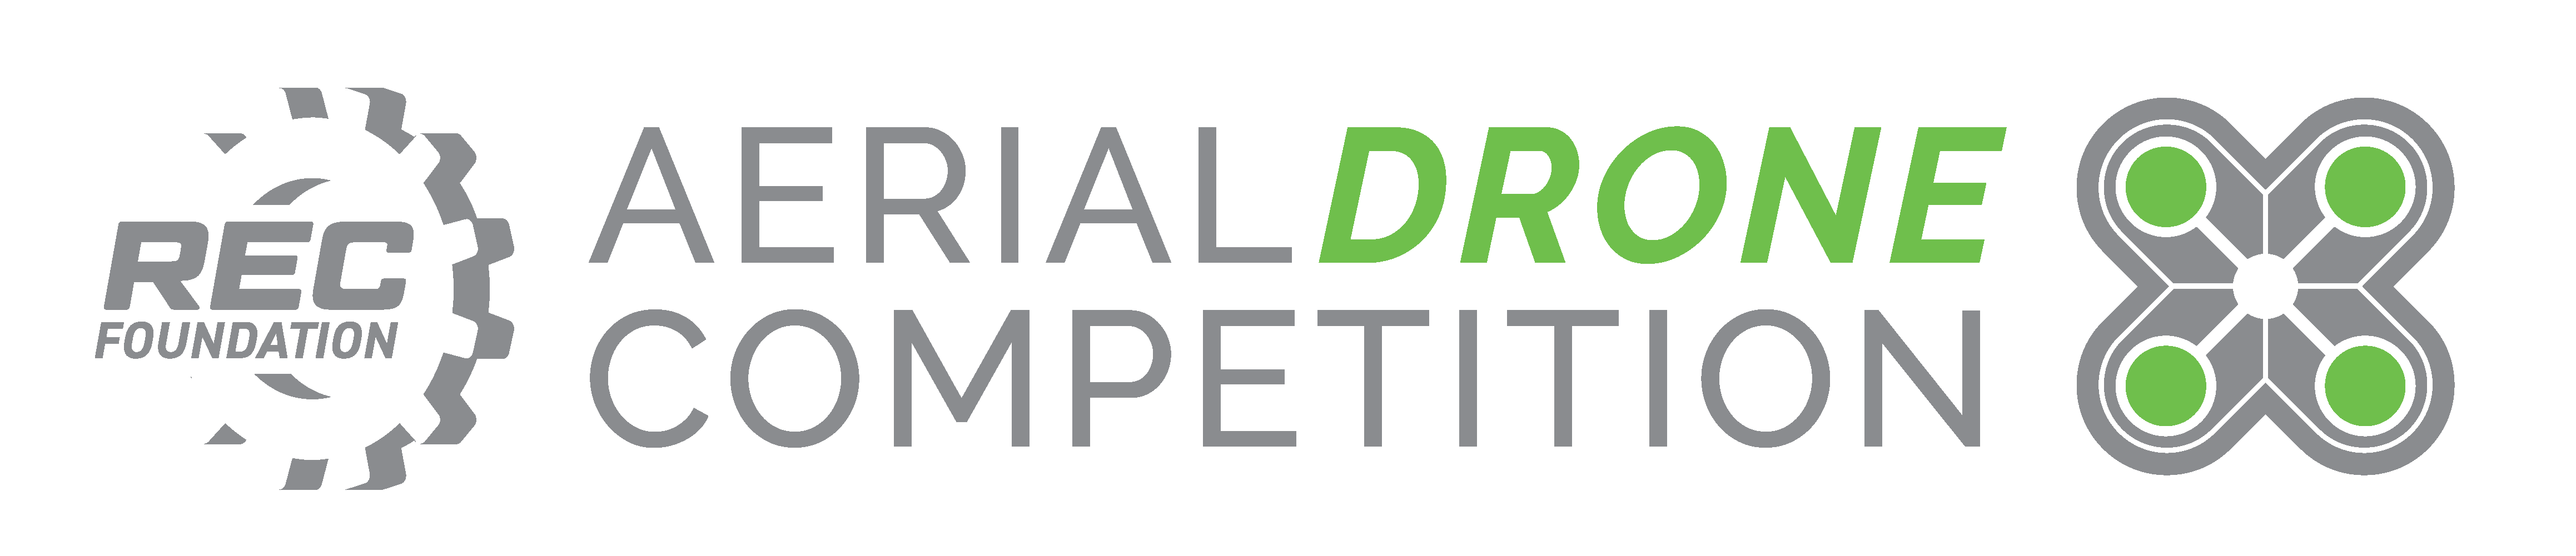 Aerial Drone Competition: Starting a Team Webinar and Q&A  - Tuesday August 16th - 6pm Central Time - hosted by the REC Foundation